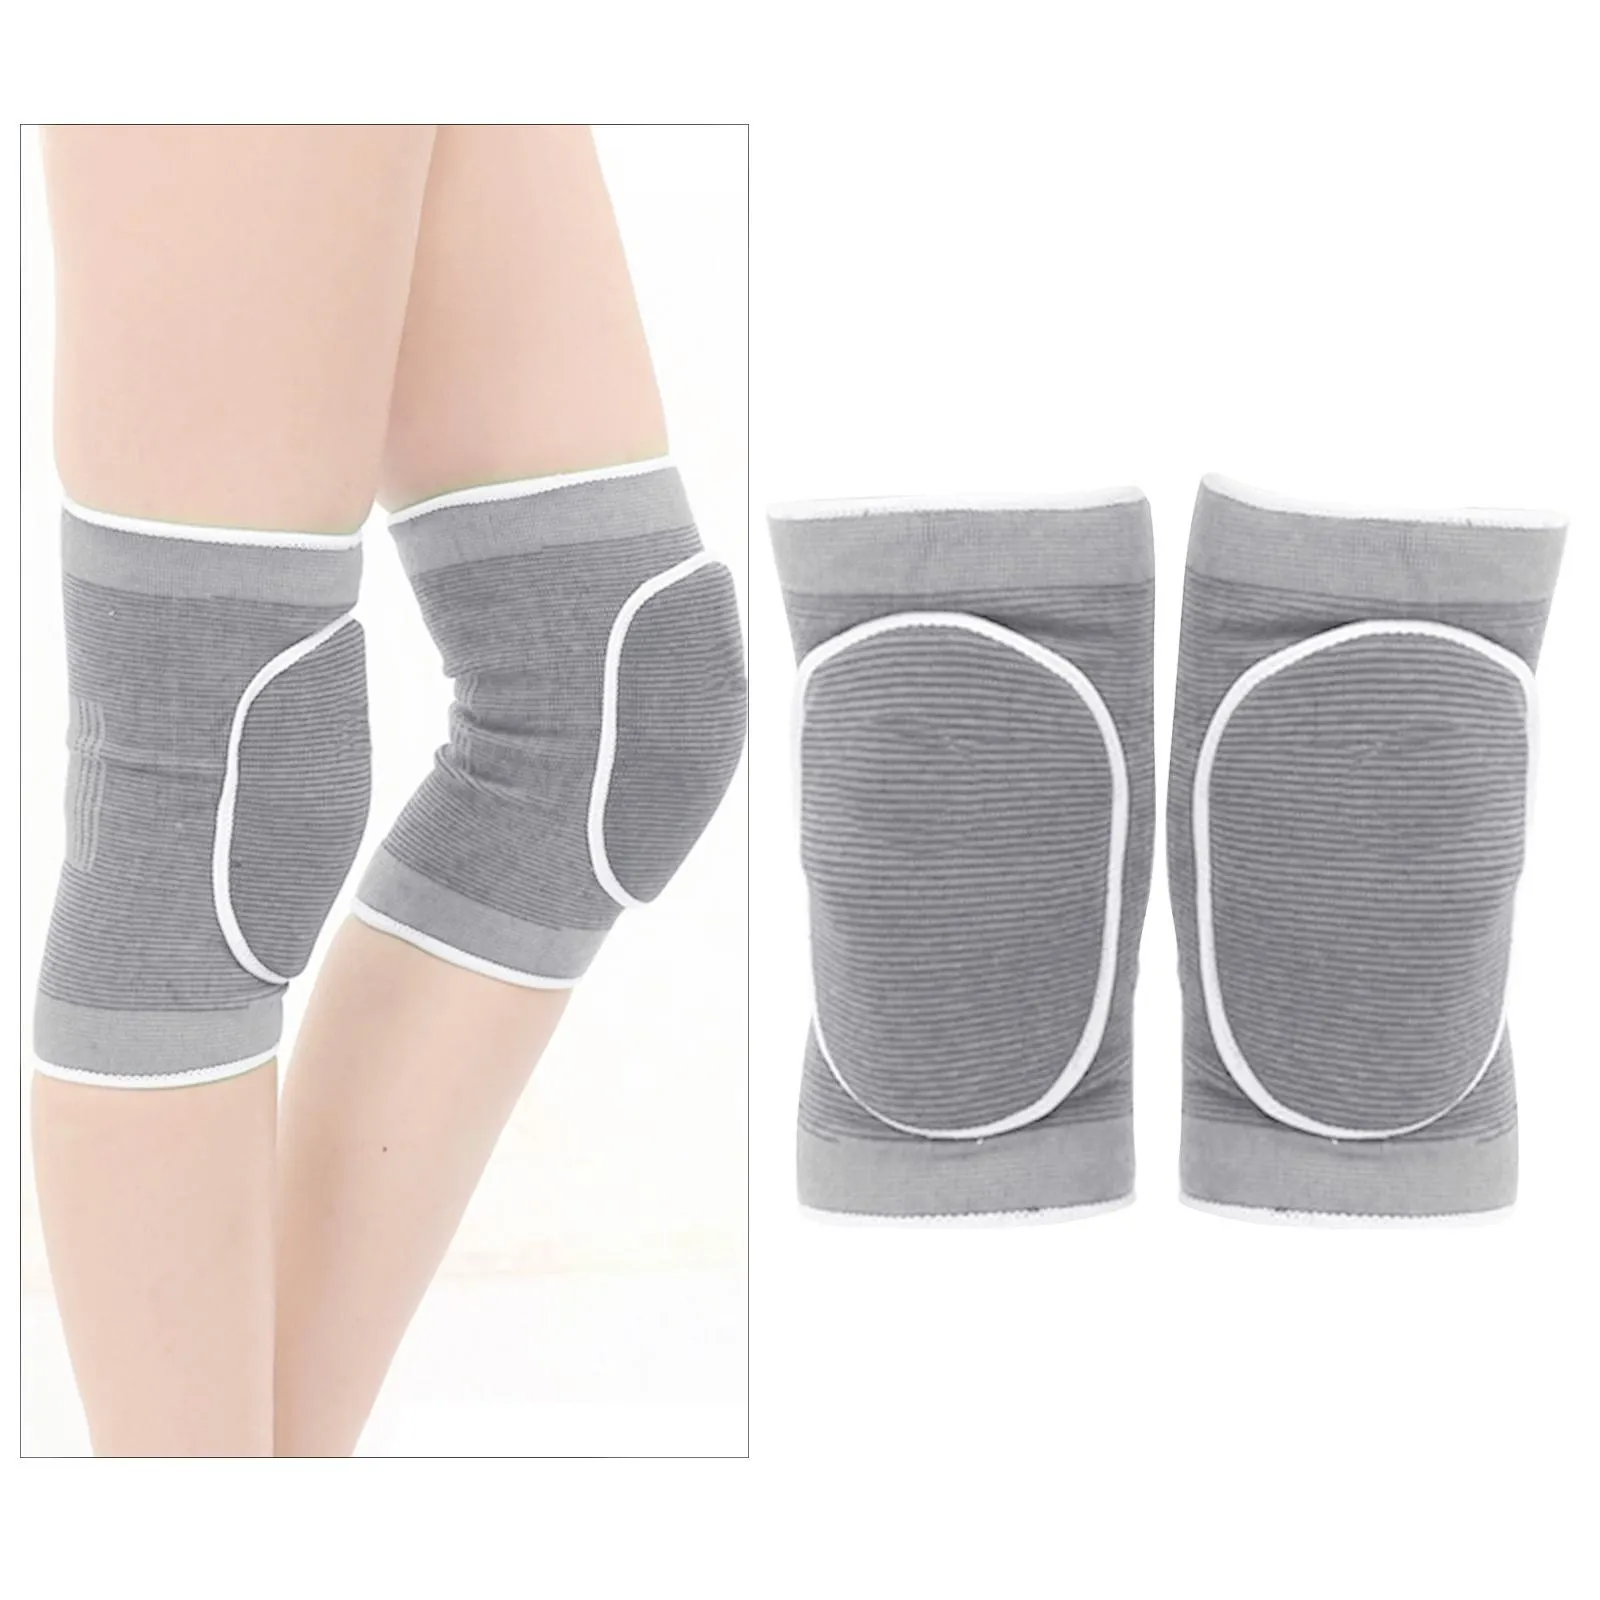 1 Pair Soft Volleyball Knee Pads, Thick Sponge Anti-Slip Breathable Knee Pads Knee Pads for Yoga Dancers Soccer 